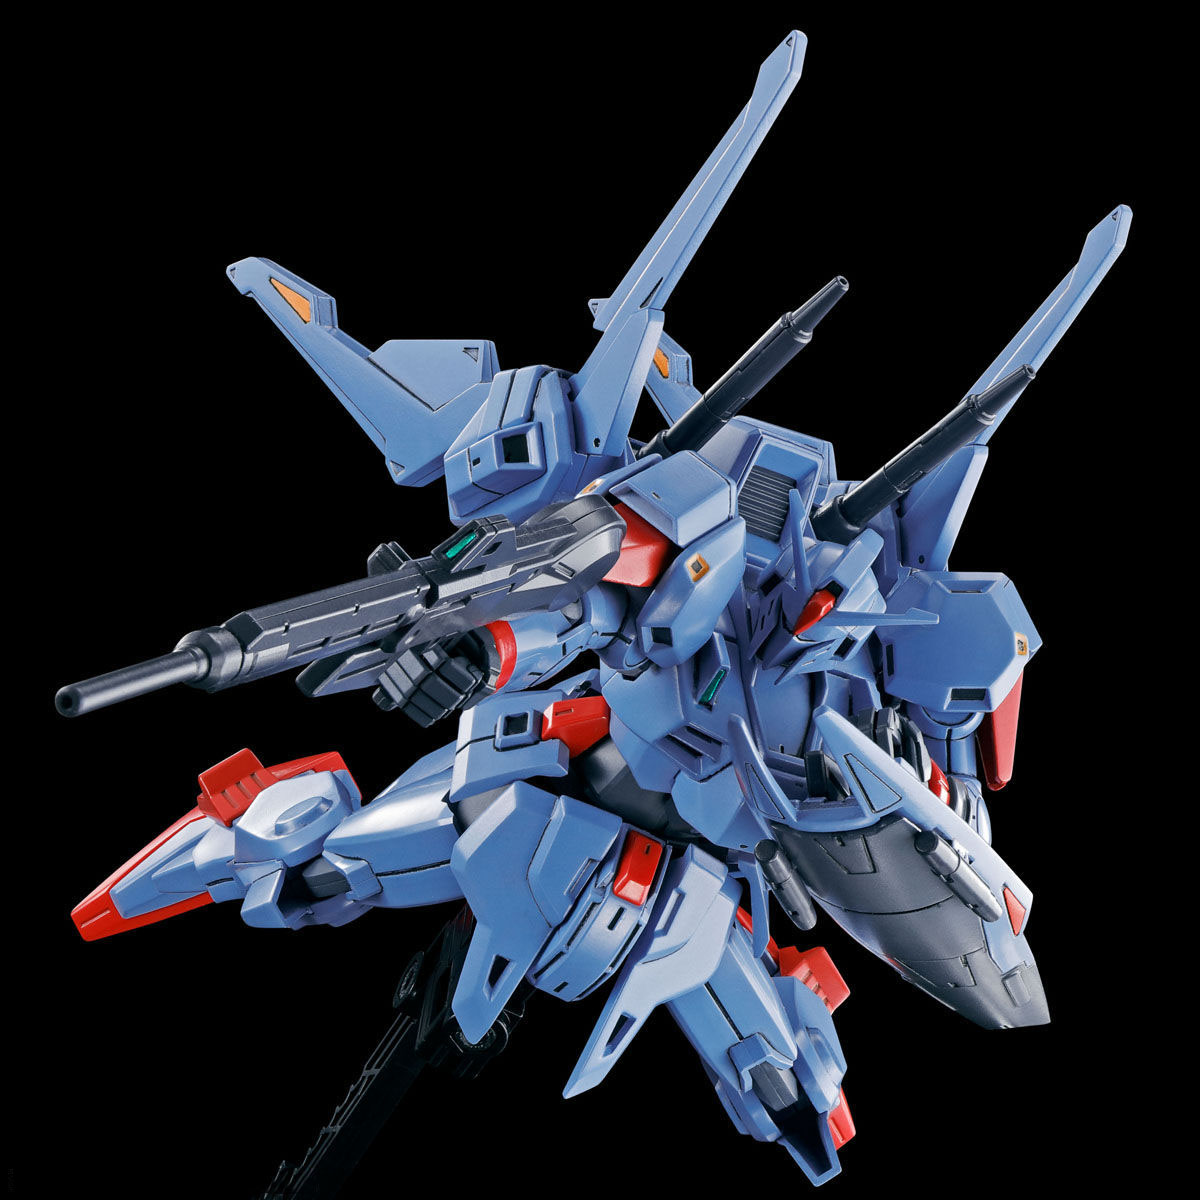 HG 1/144 GUNDAM Mk-Ⅲ [May 2021 Delivery] | GUNDAM | PREMIUM BANDAI  Singapore Online Store for Action Figures, Model Kits, Toys and more